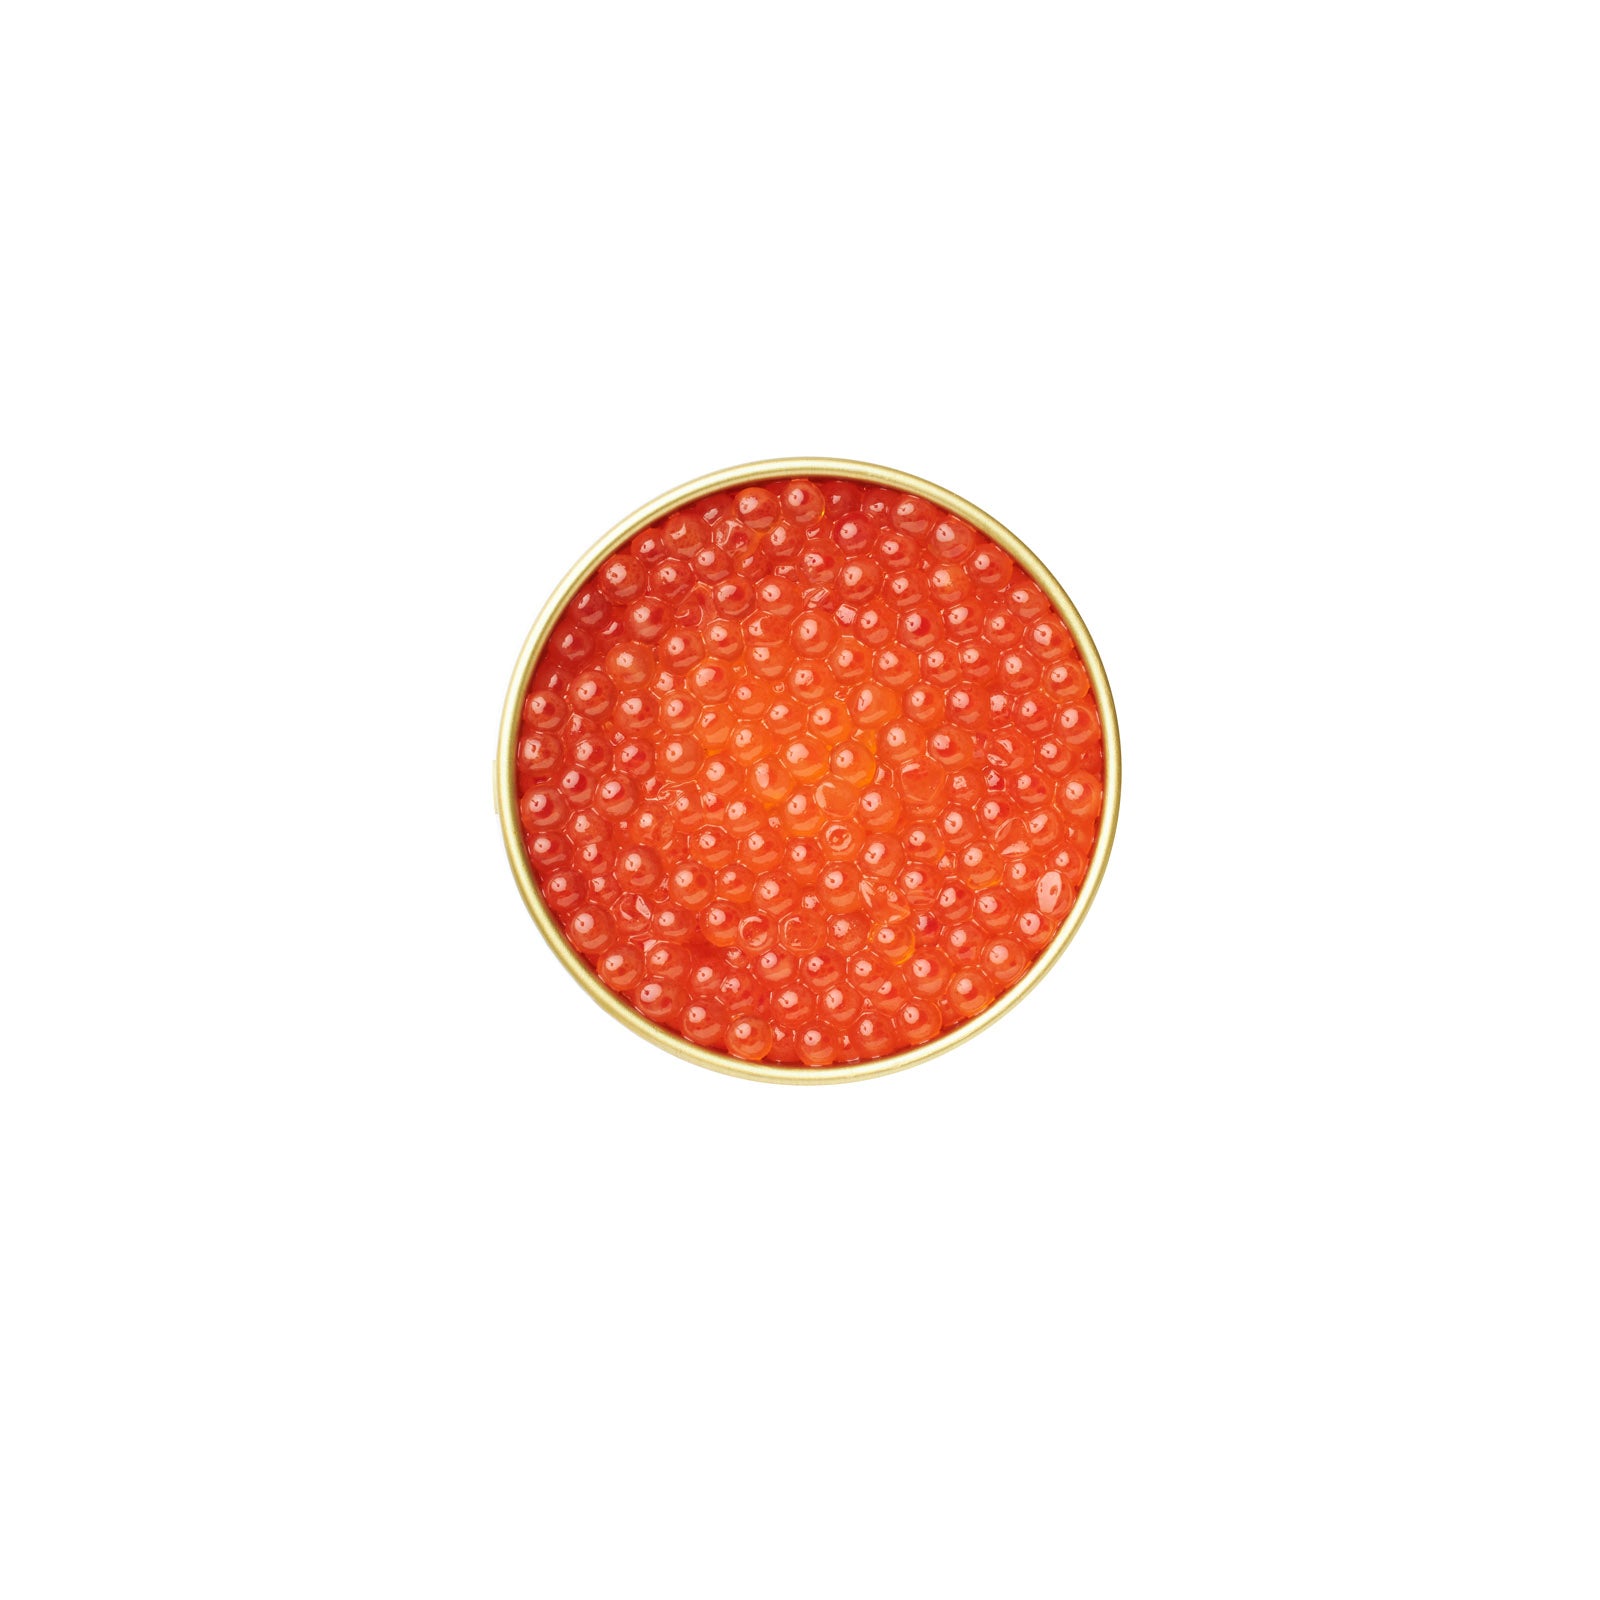 Rainbow Trout Roe